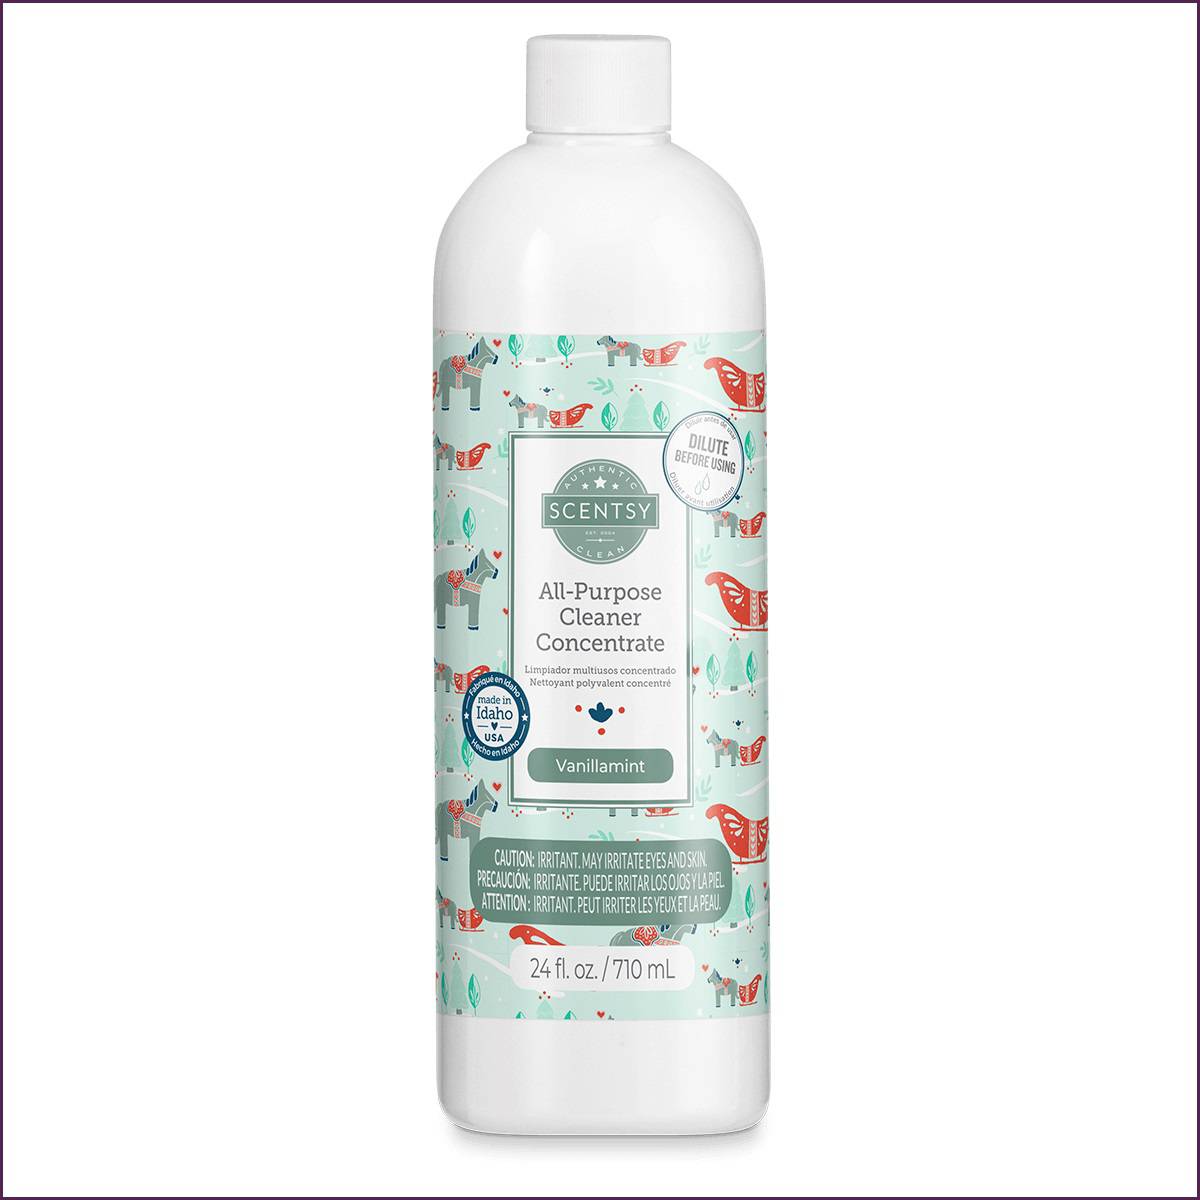 Vanillamint All-Purpose Scentsy Cleaner